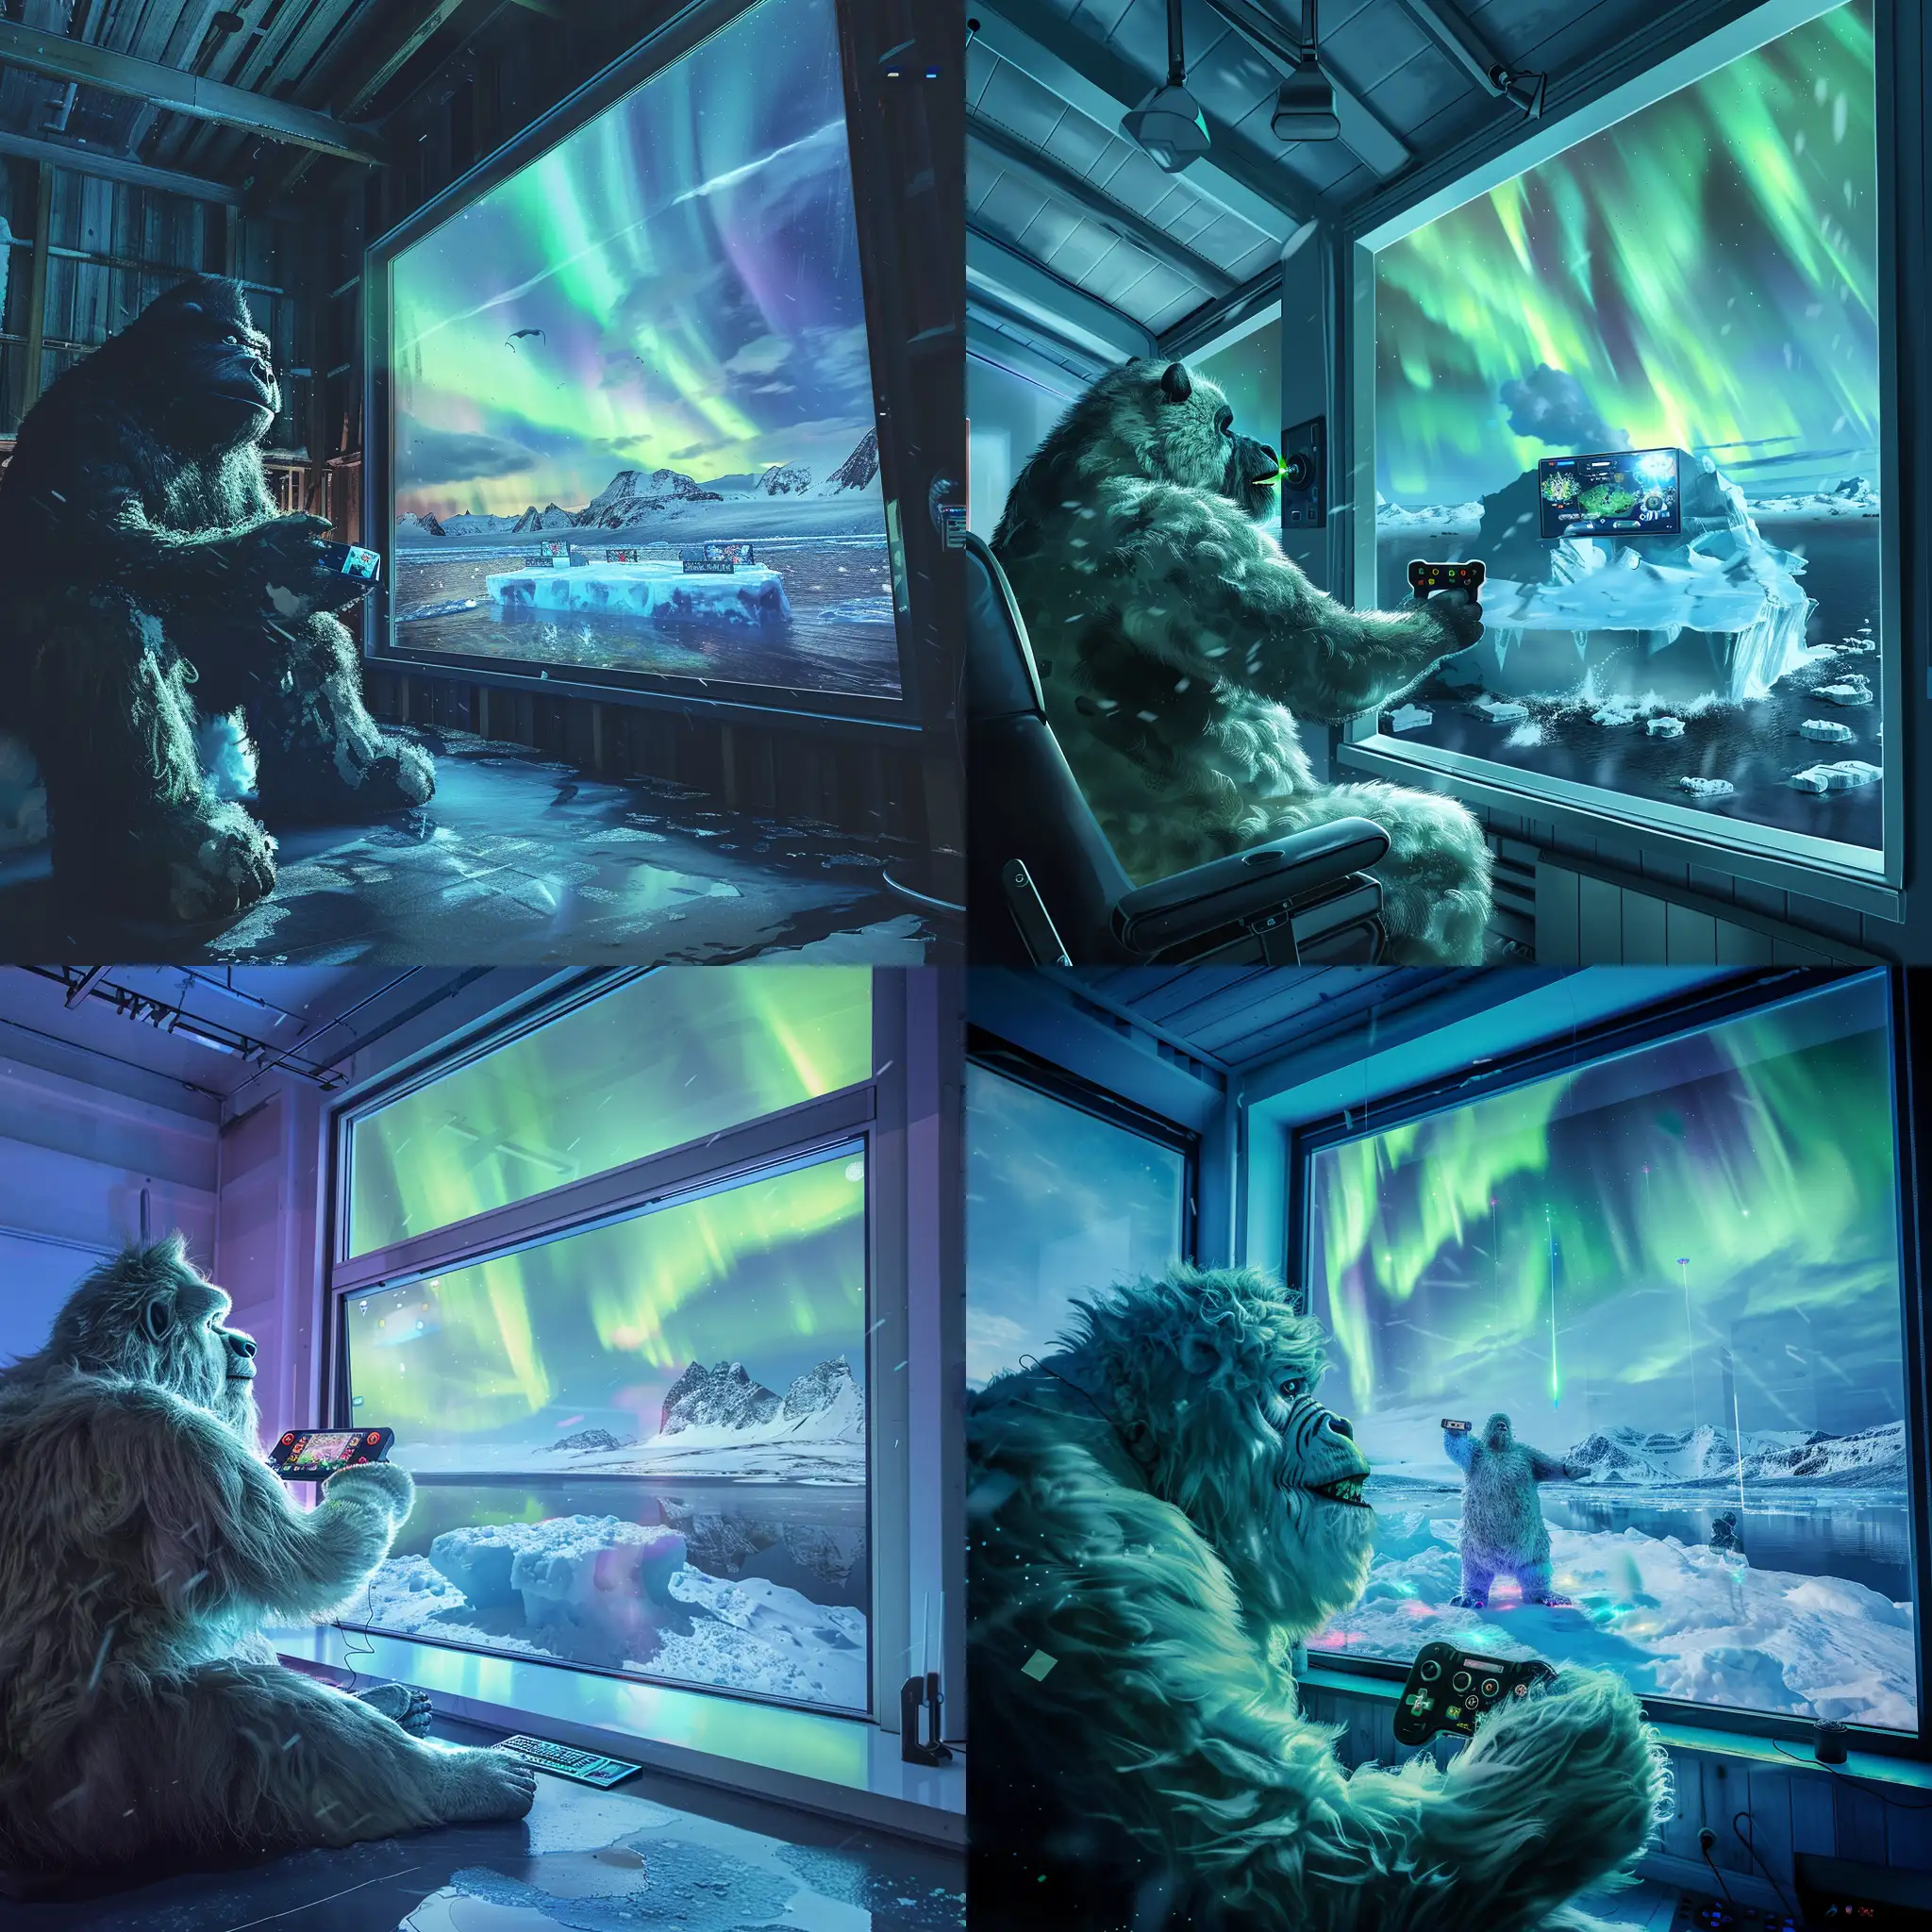  realistic  yeti playing video games in a room that are projected on an iceberg while the northern lights fill up the sky out the window in the background. the yeti is intimidating body structure but friendly face. 
